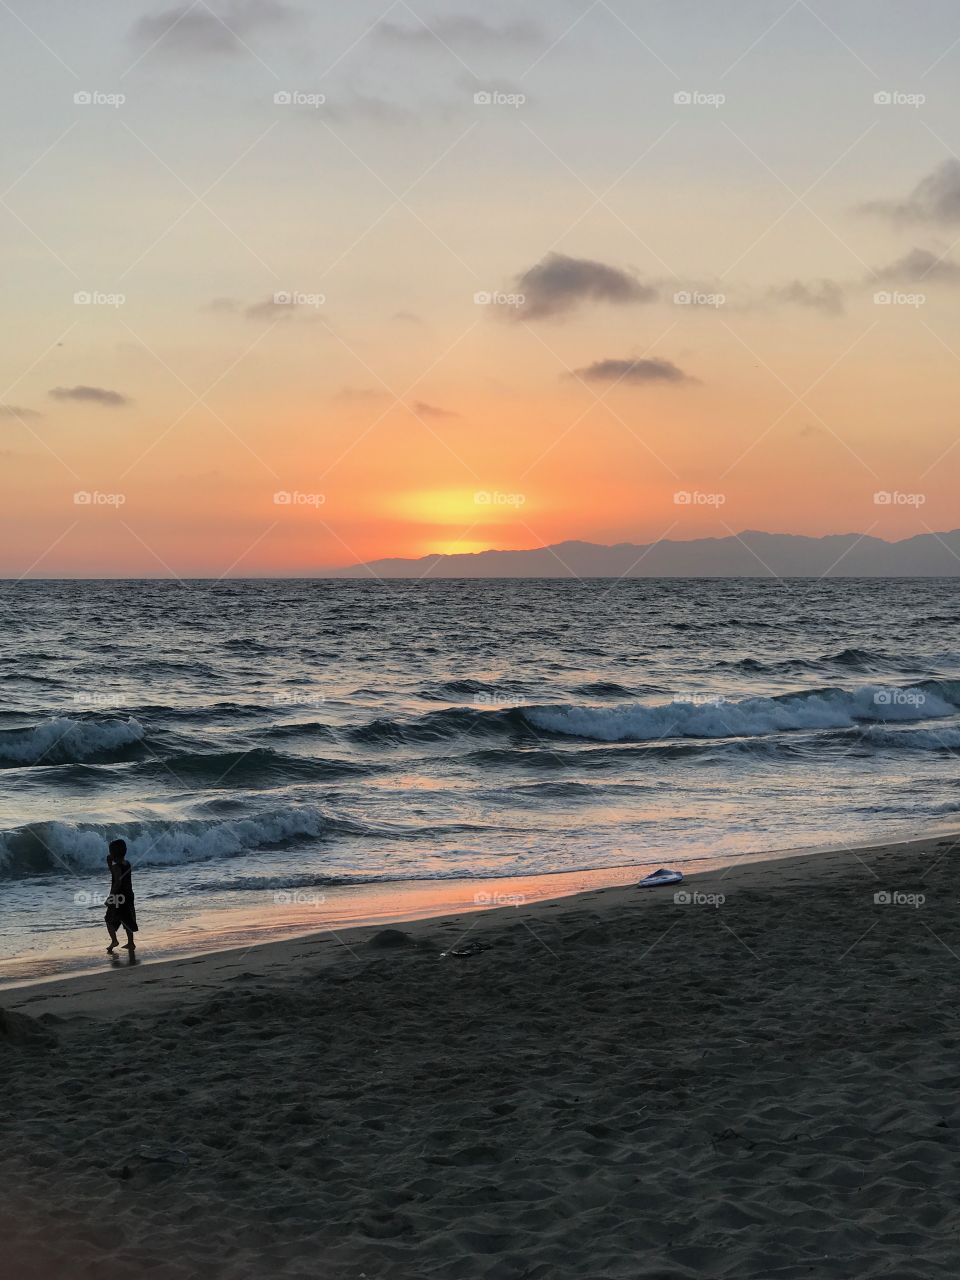 A view of the sunset over Dockweiler beach as a child walks across the sand 